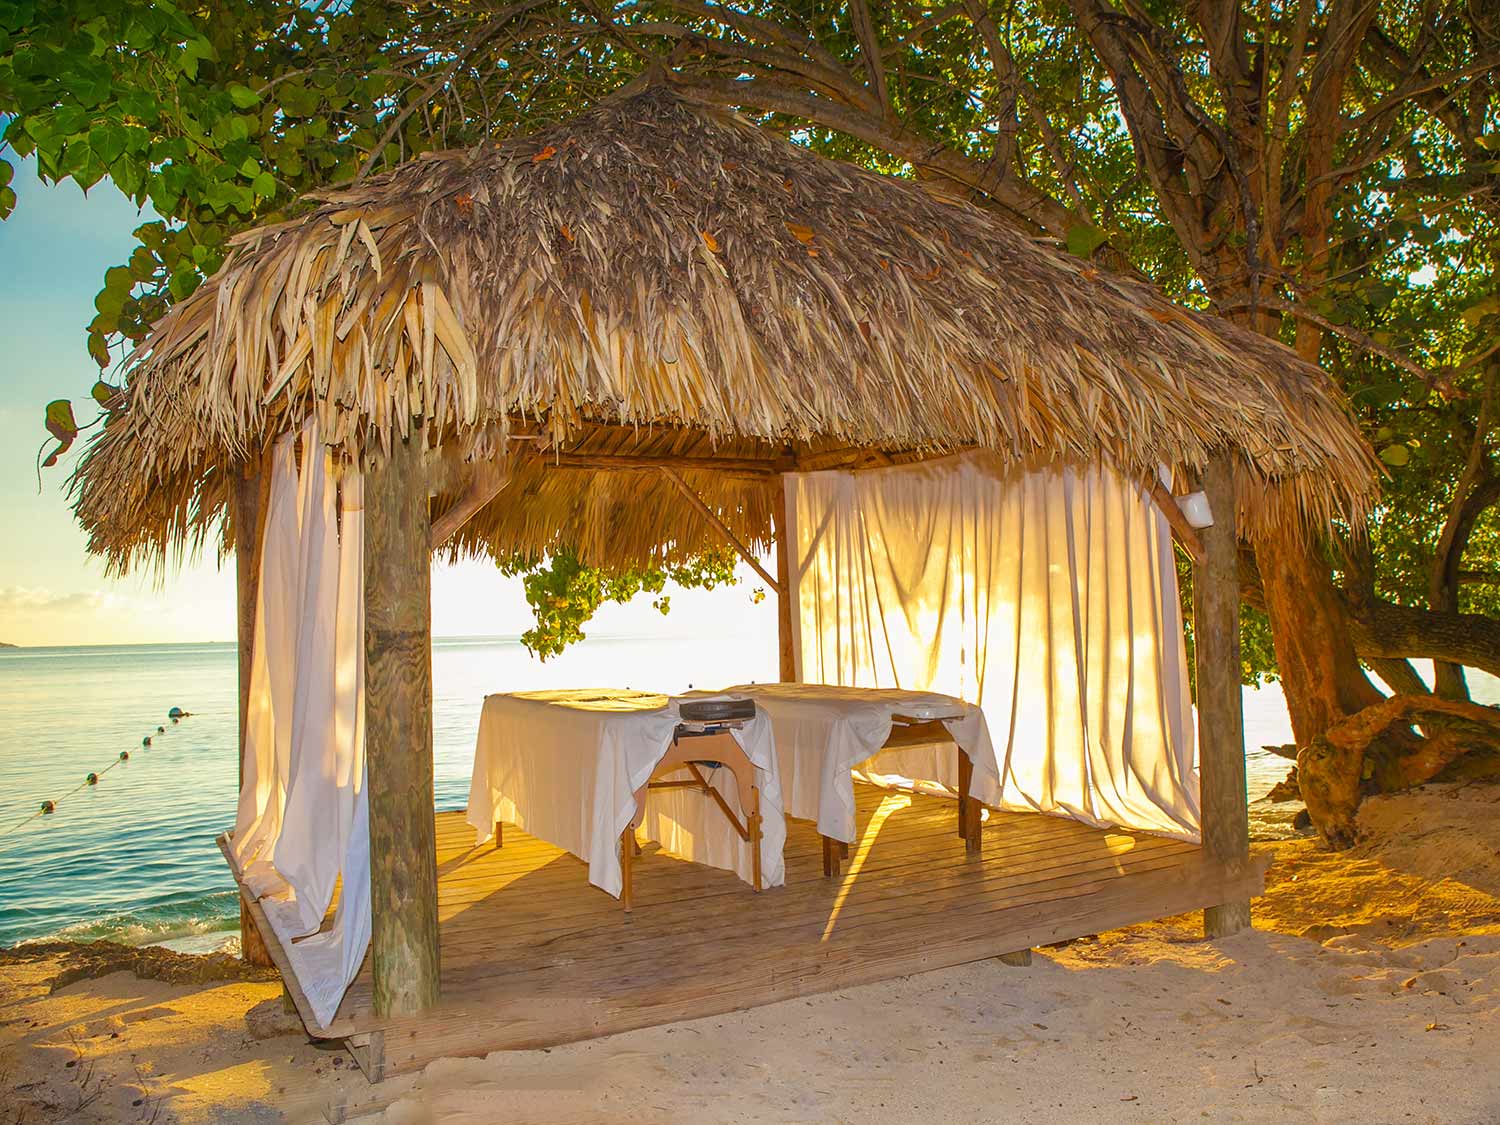 Hedonism II offers many amenities just like ordinary resorts, including romantic couples massages right on the beach.